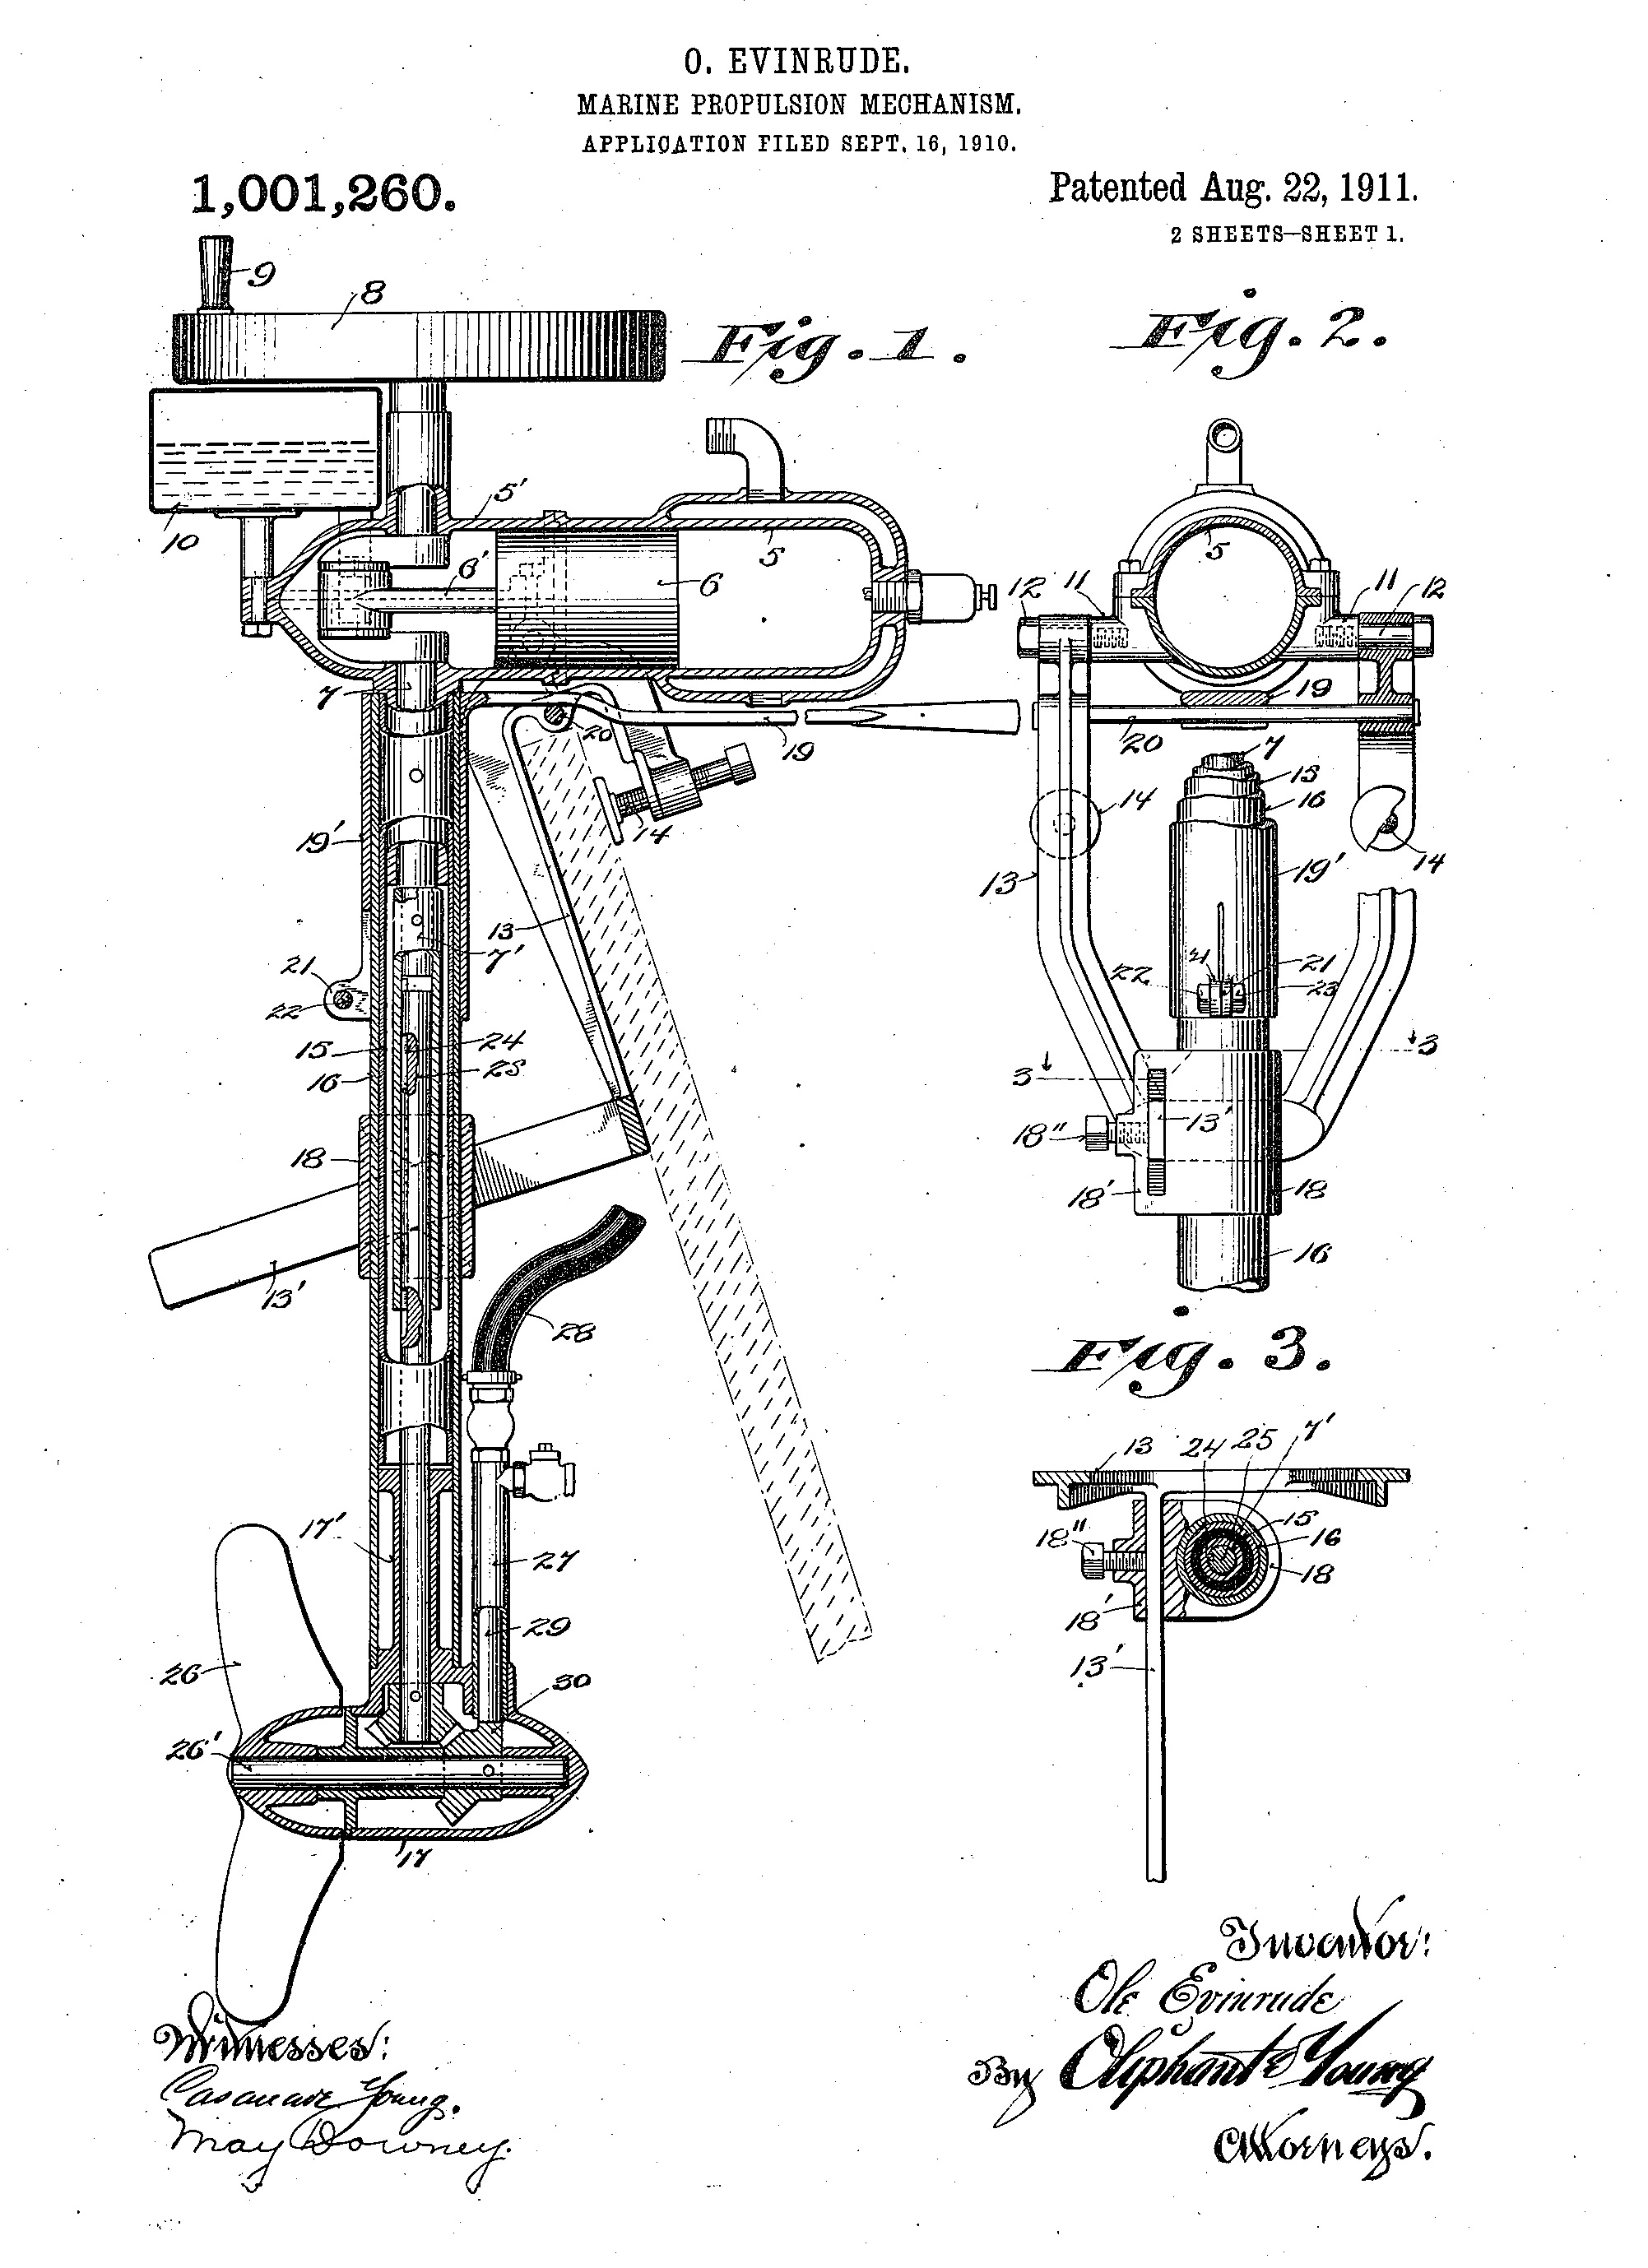 Patent drawing for “Marine Propulsion Mechanism” by Ole Evinrude.